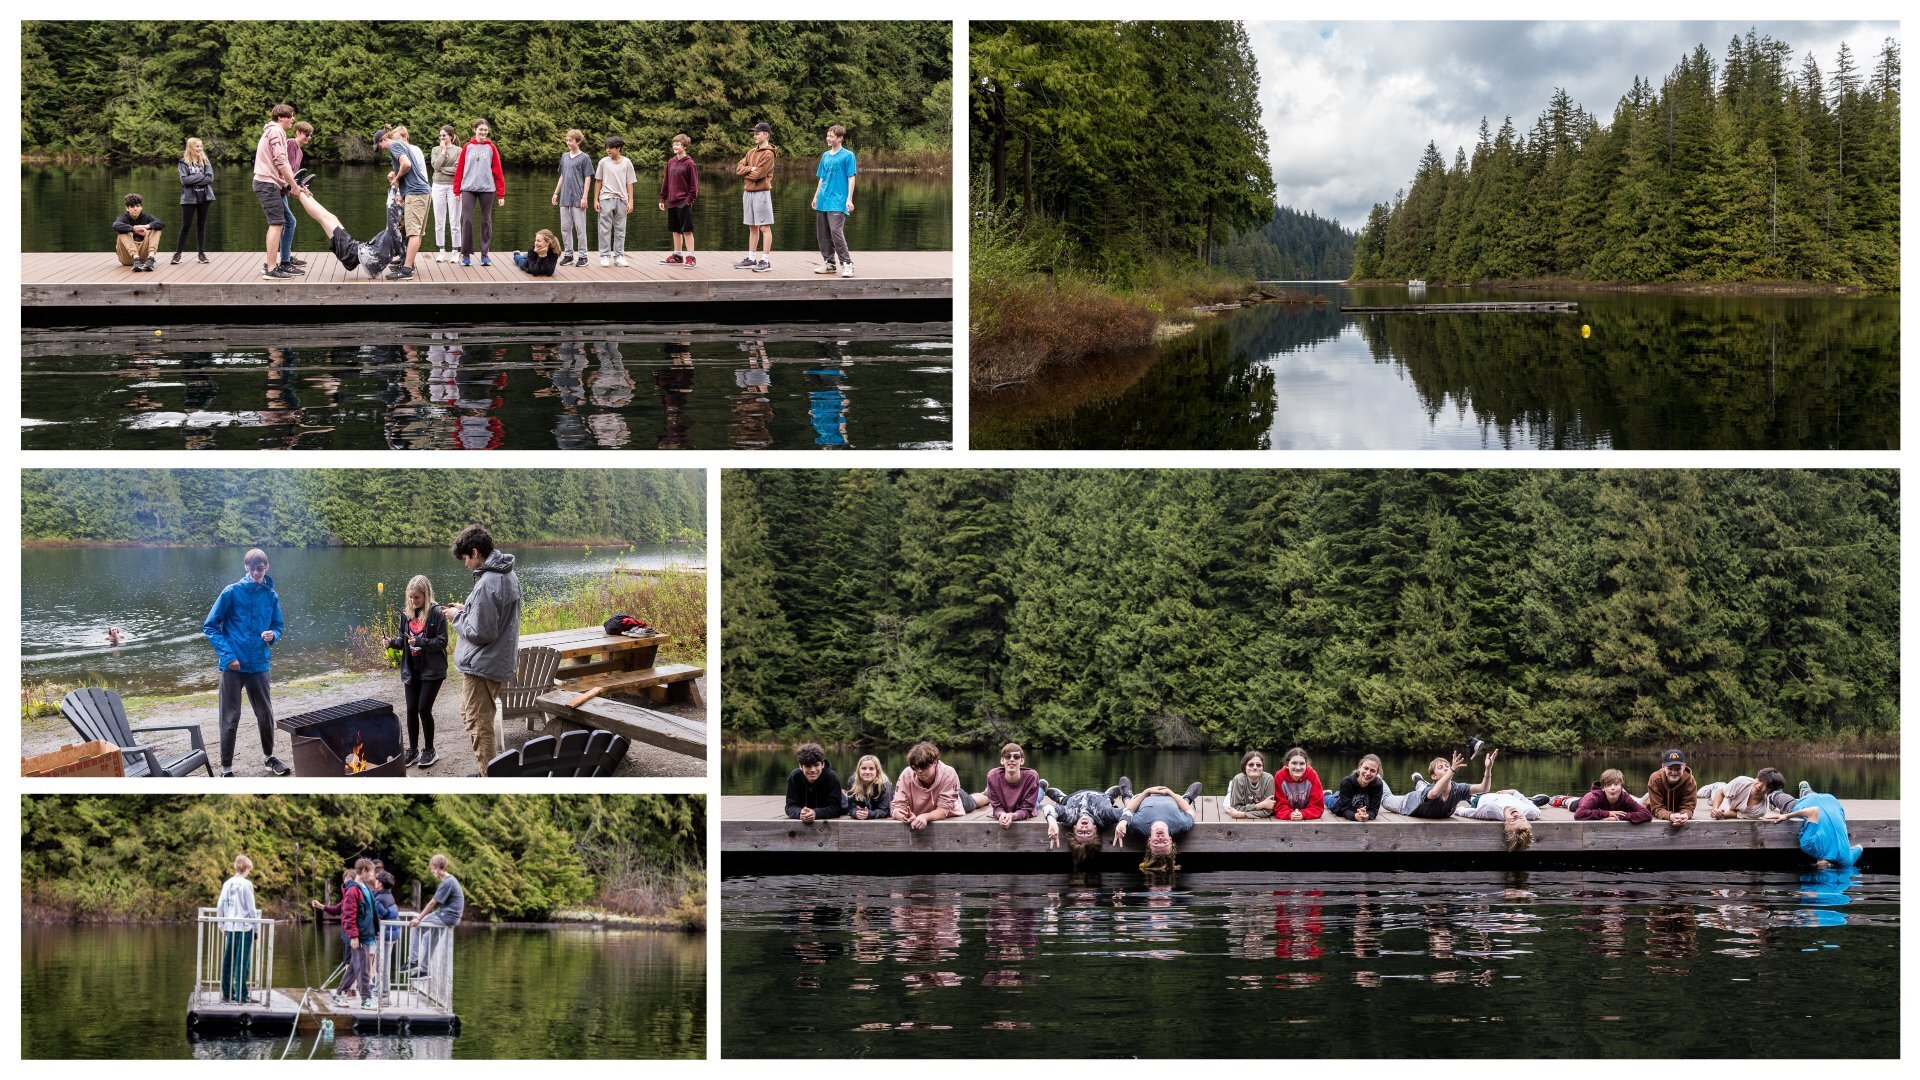 photos in a collage of teenagers at a lake